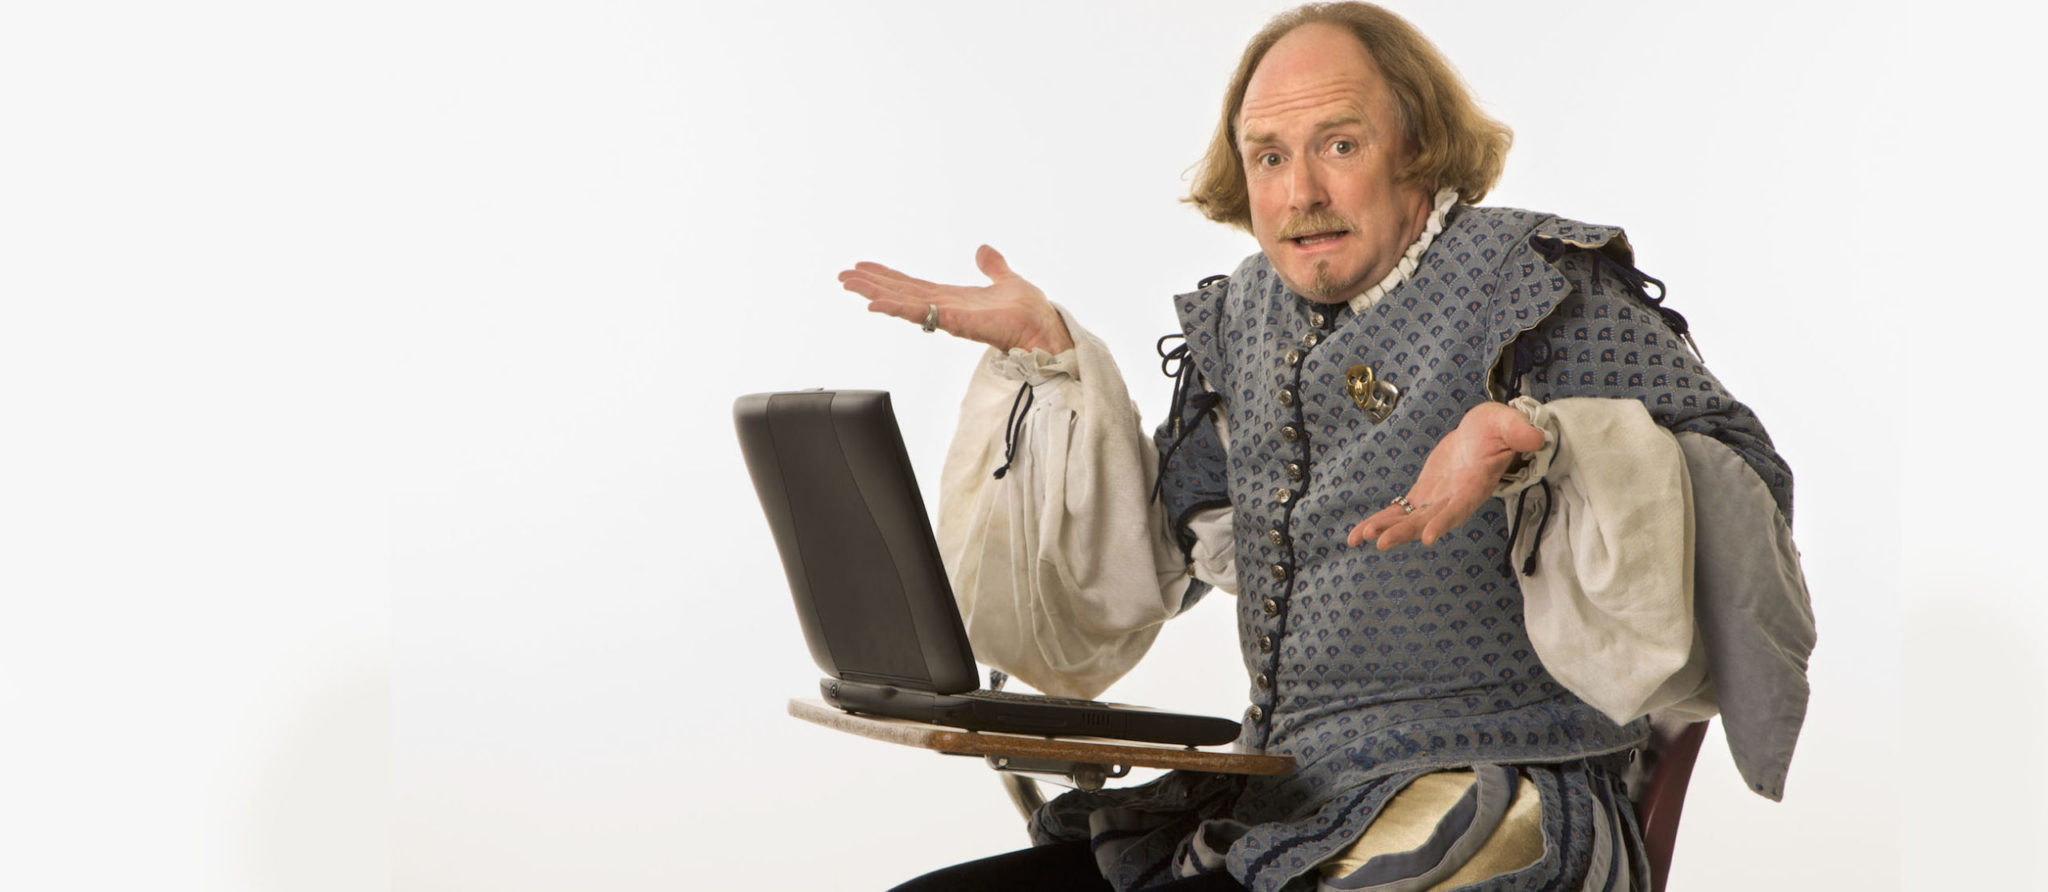 Image of Shakespeare using a laptop